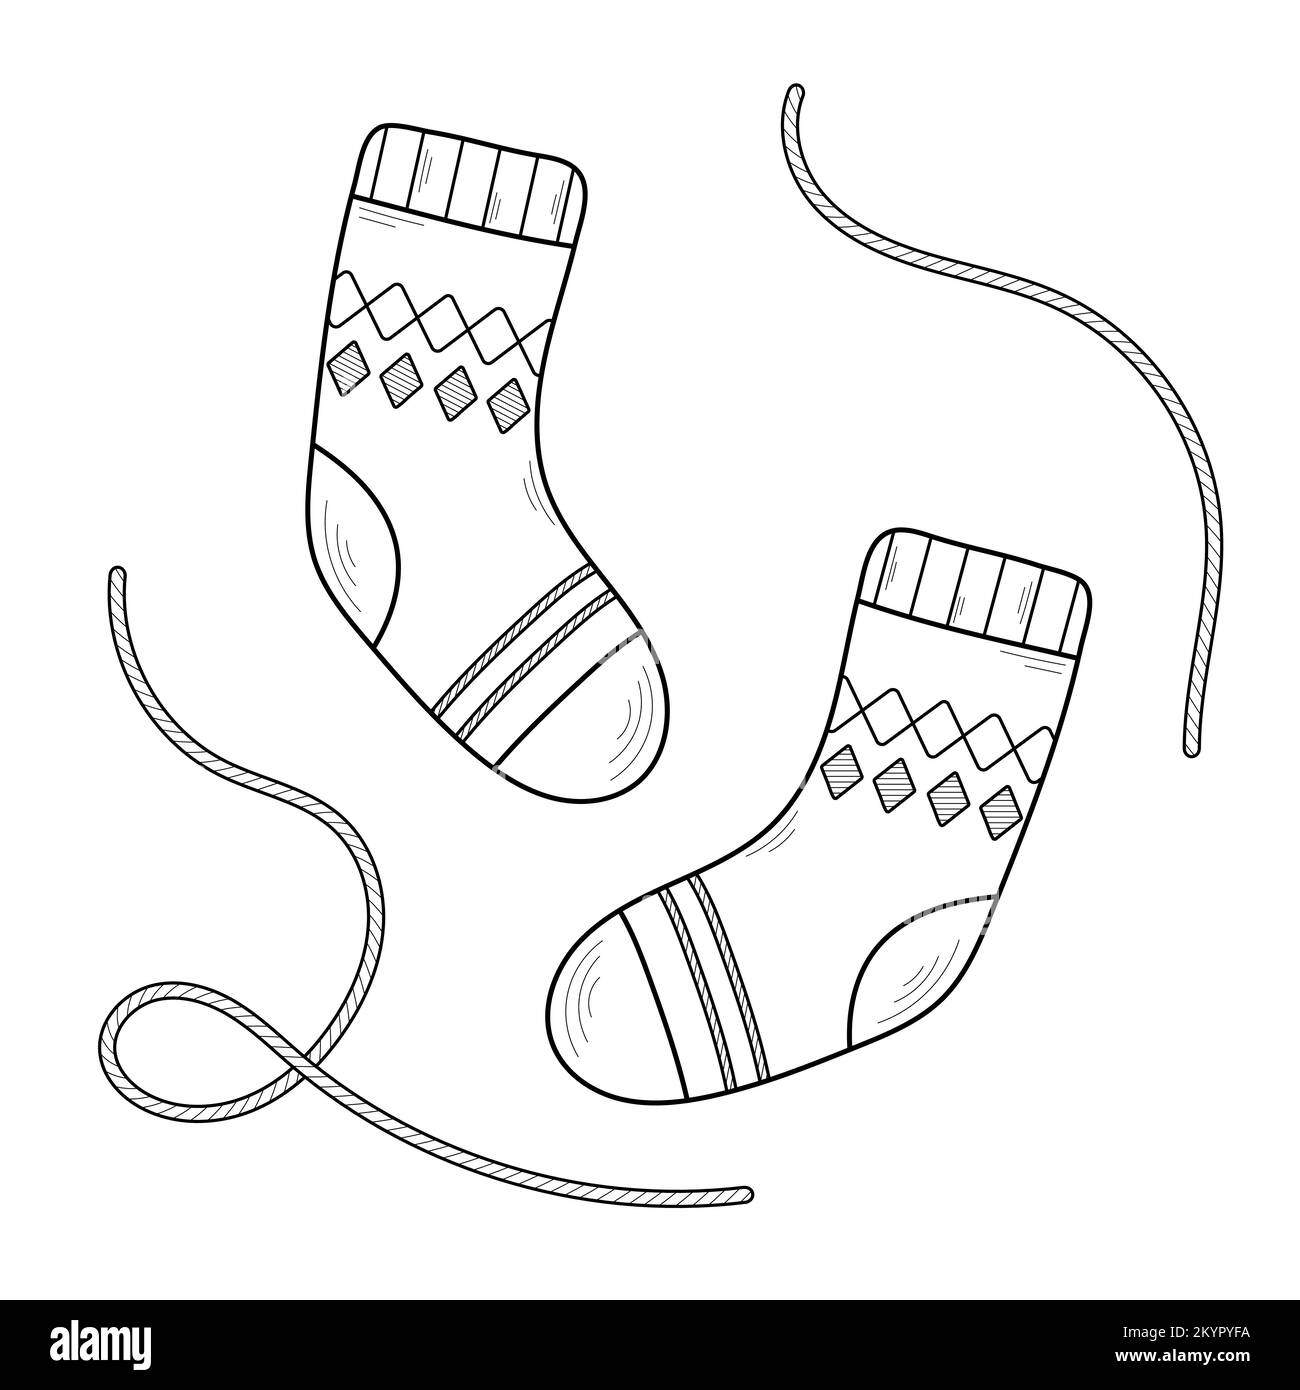 Hand drawn warm, cozy knitted socks. Doodle sketch style. Vector illustration isolated on white background. Stock Vector